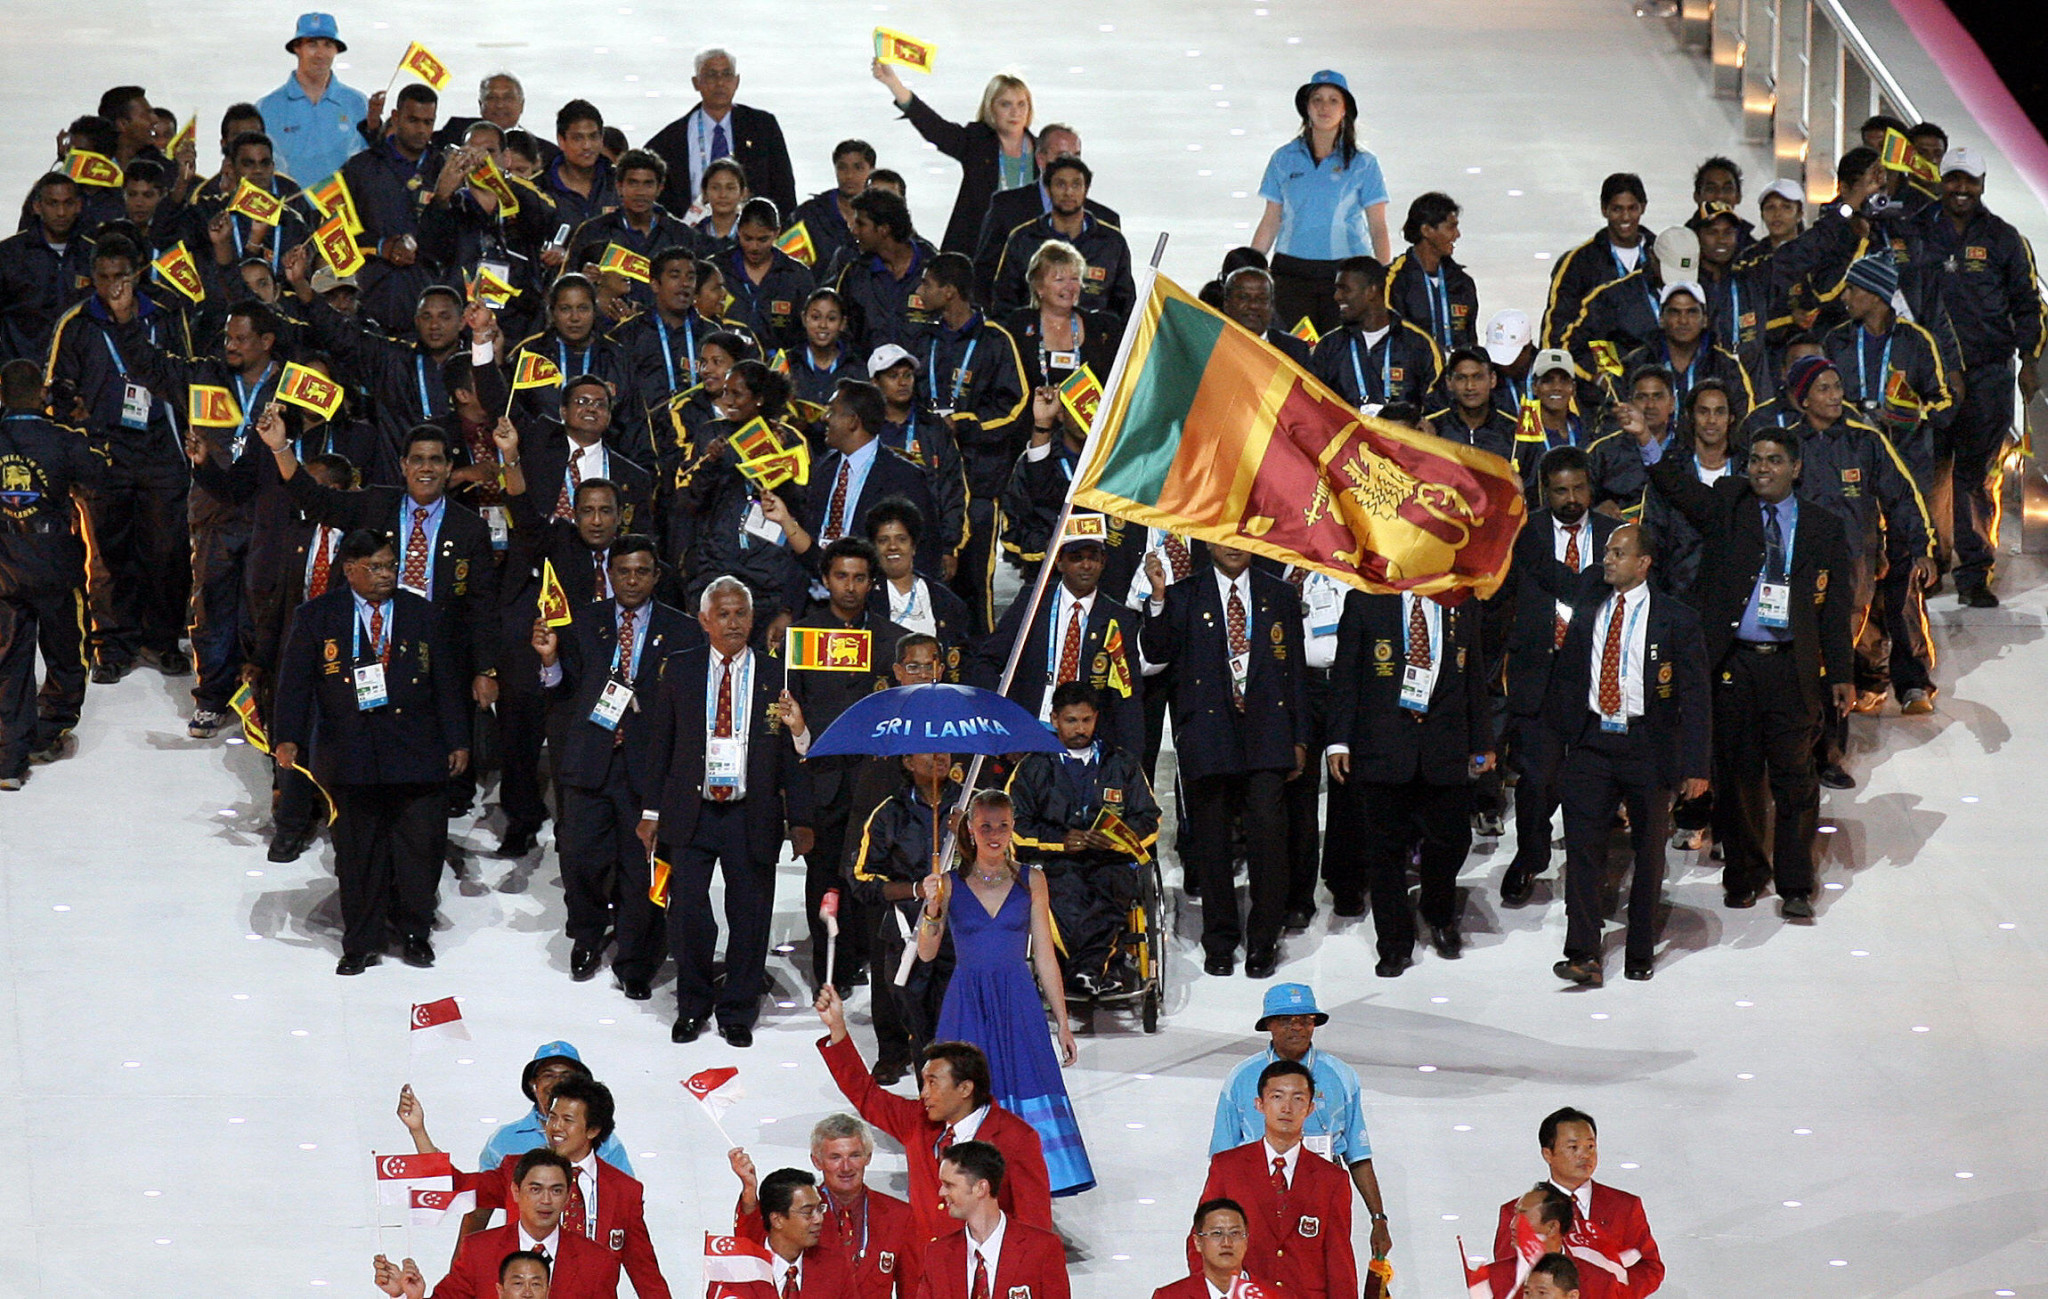 The CGF confirmed Sri Lanka's interest in bidding for the 2026 Commonwealth Games ©Getty Images